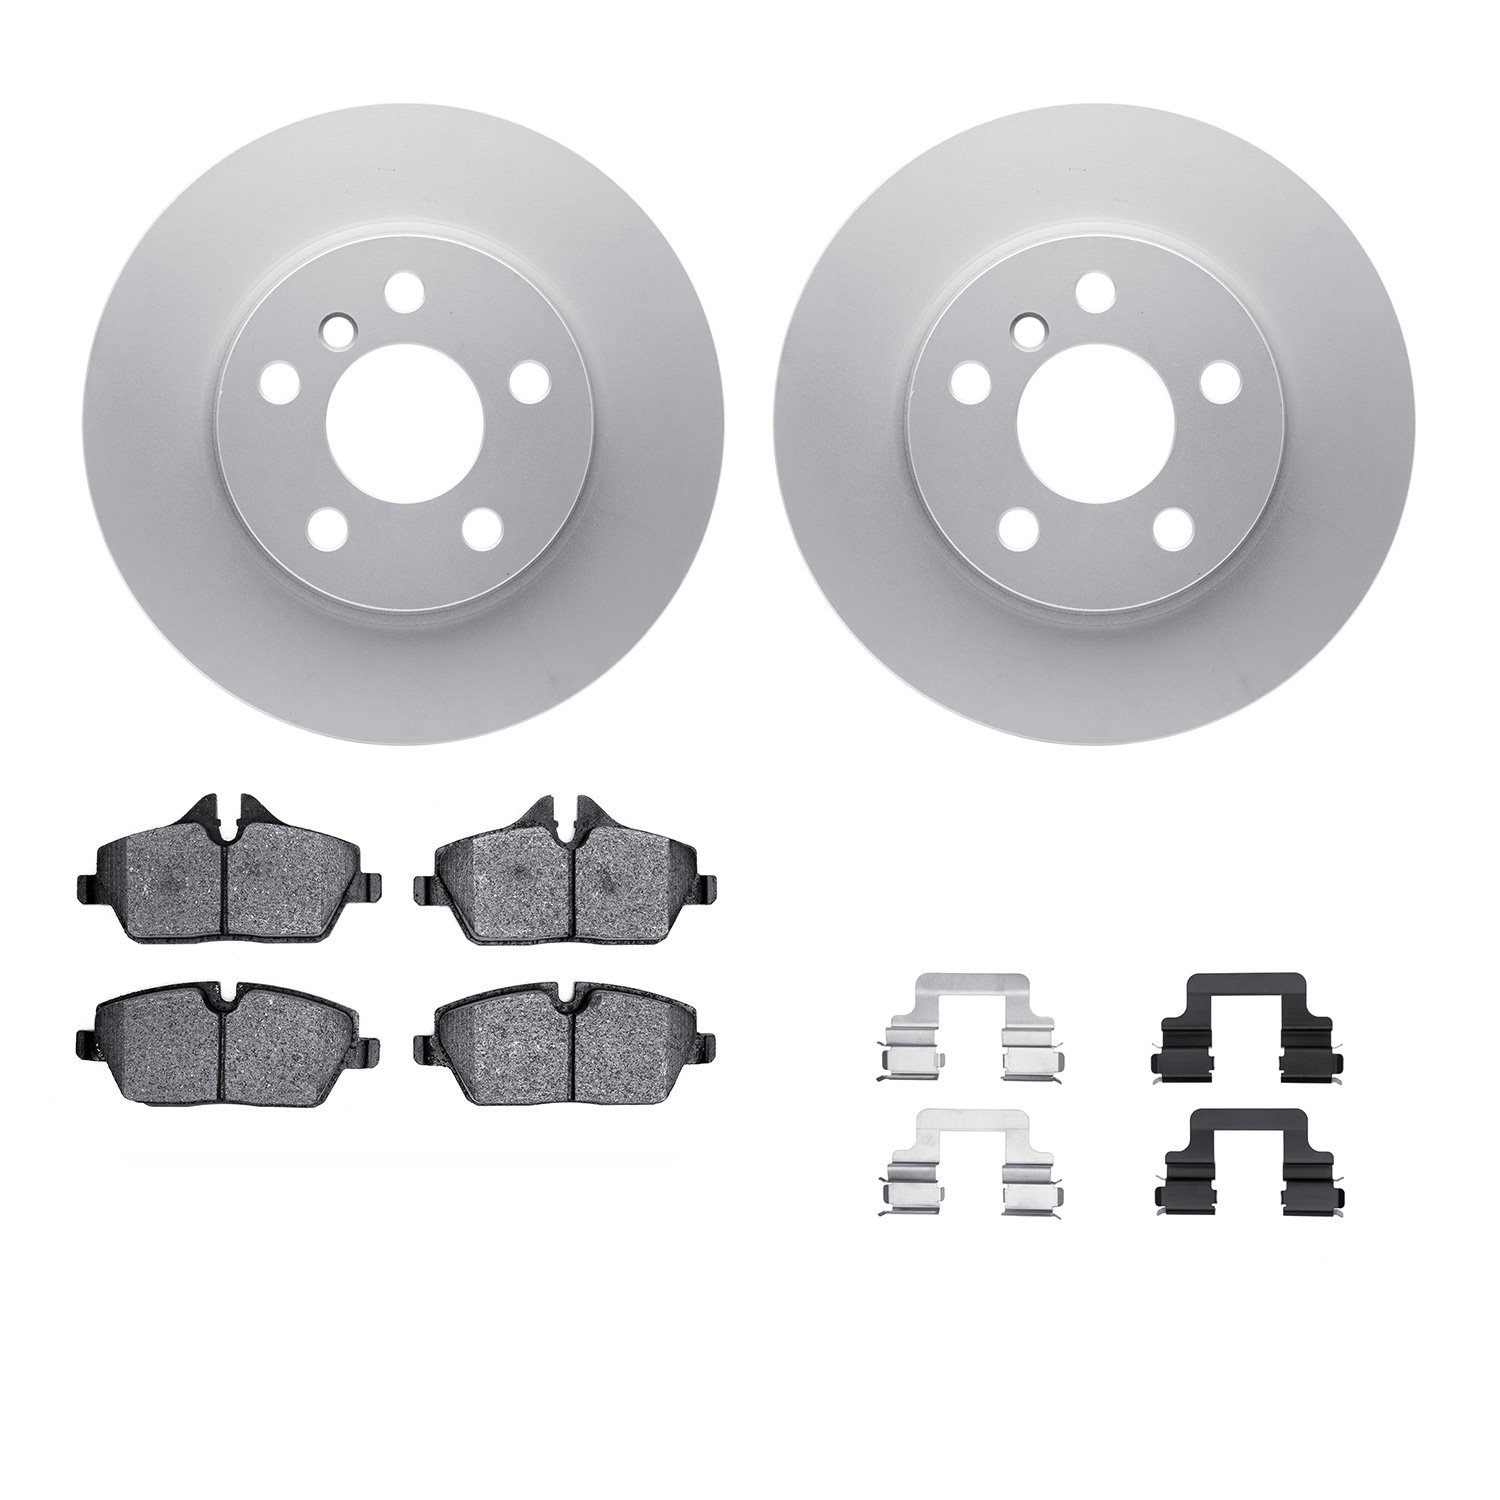 4312-32012 Geospec Brake Rotors with 3000-Series Ceramic Brake Pads & Hardware, Fits Select Mini, Position: Front